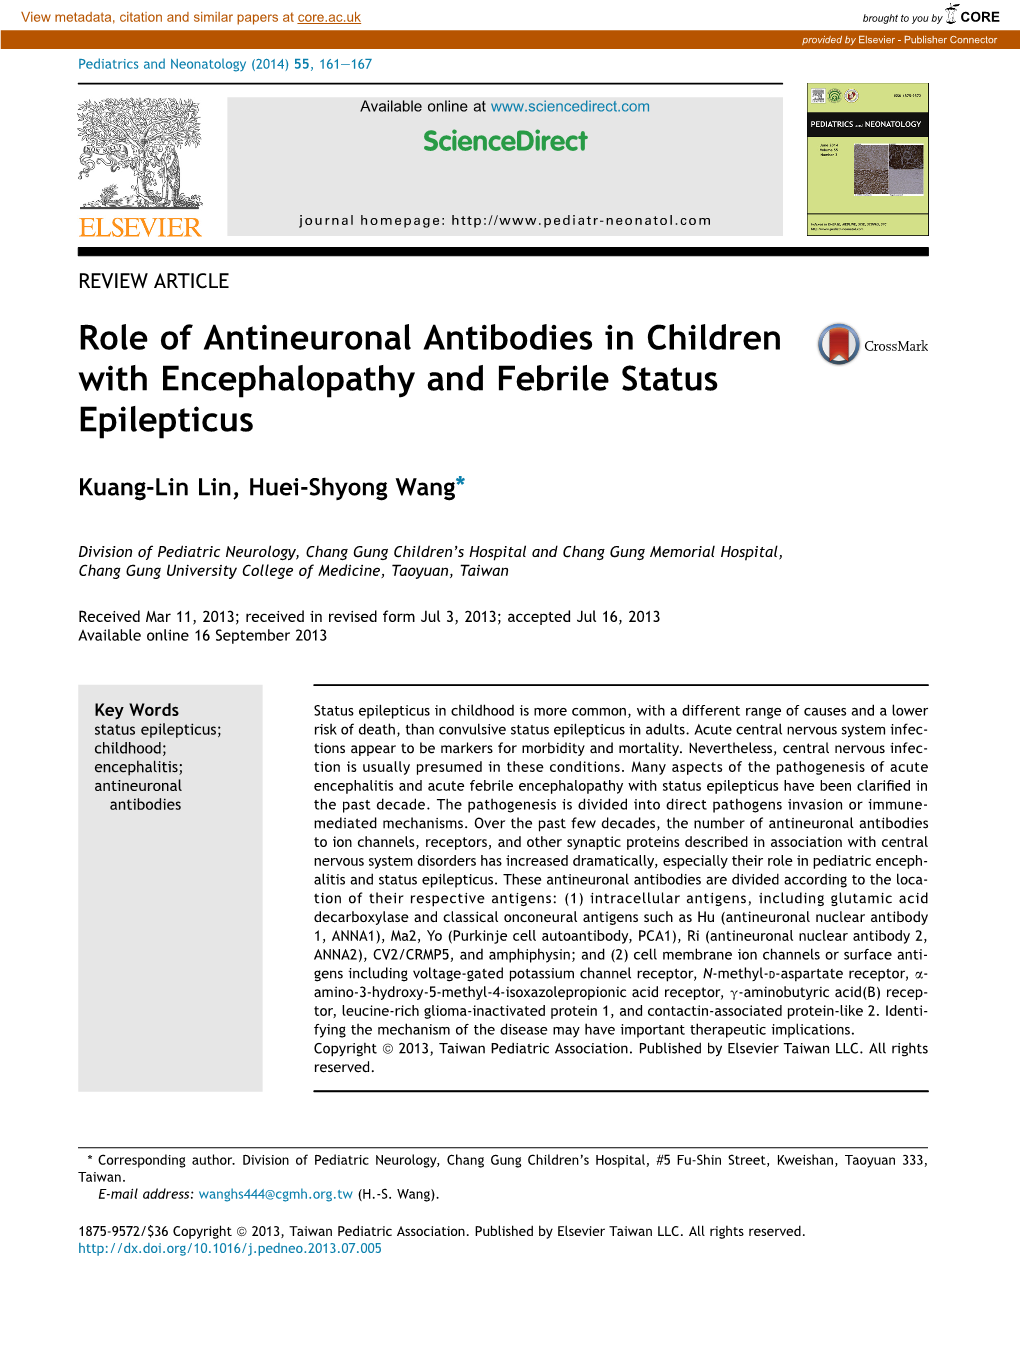 Role of Antineuronal Antibodies in Children with Encephalopathy and Febrile Status Epilepticus